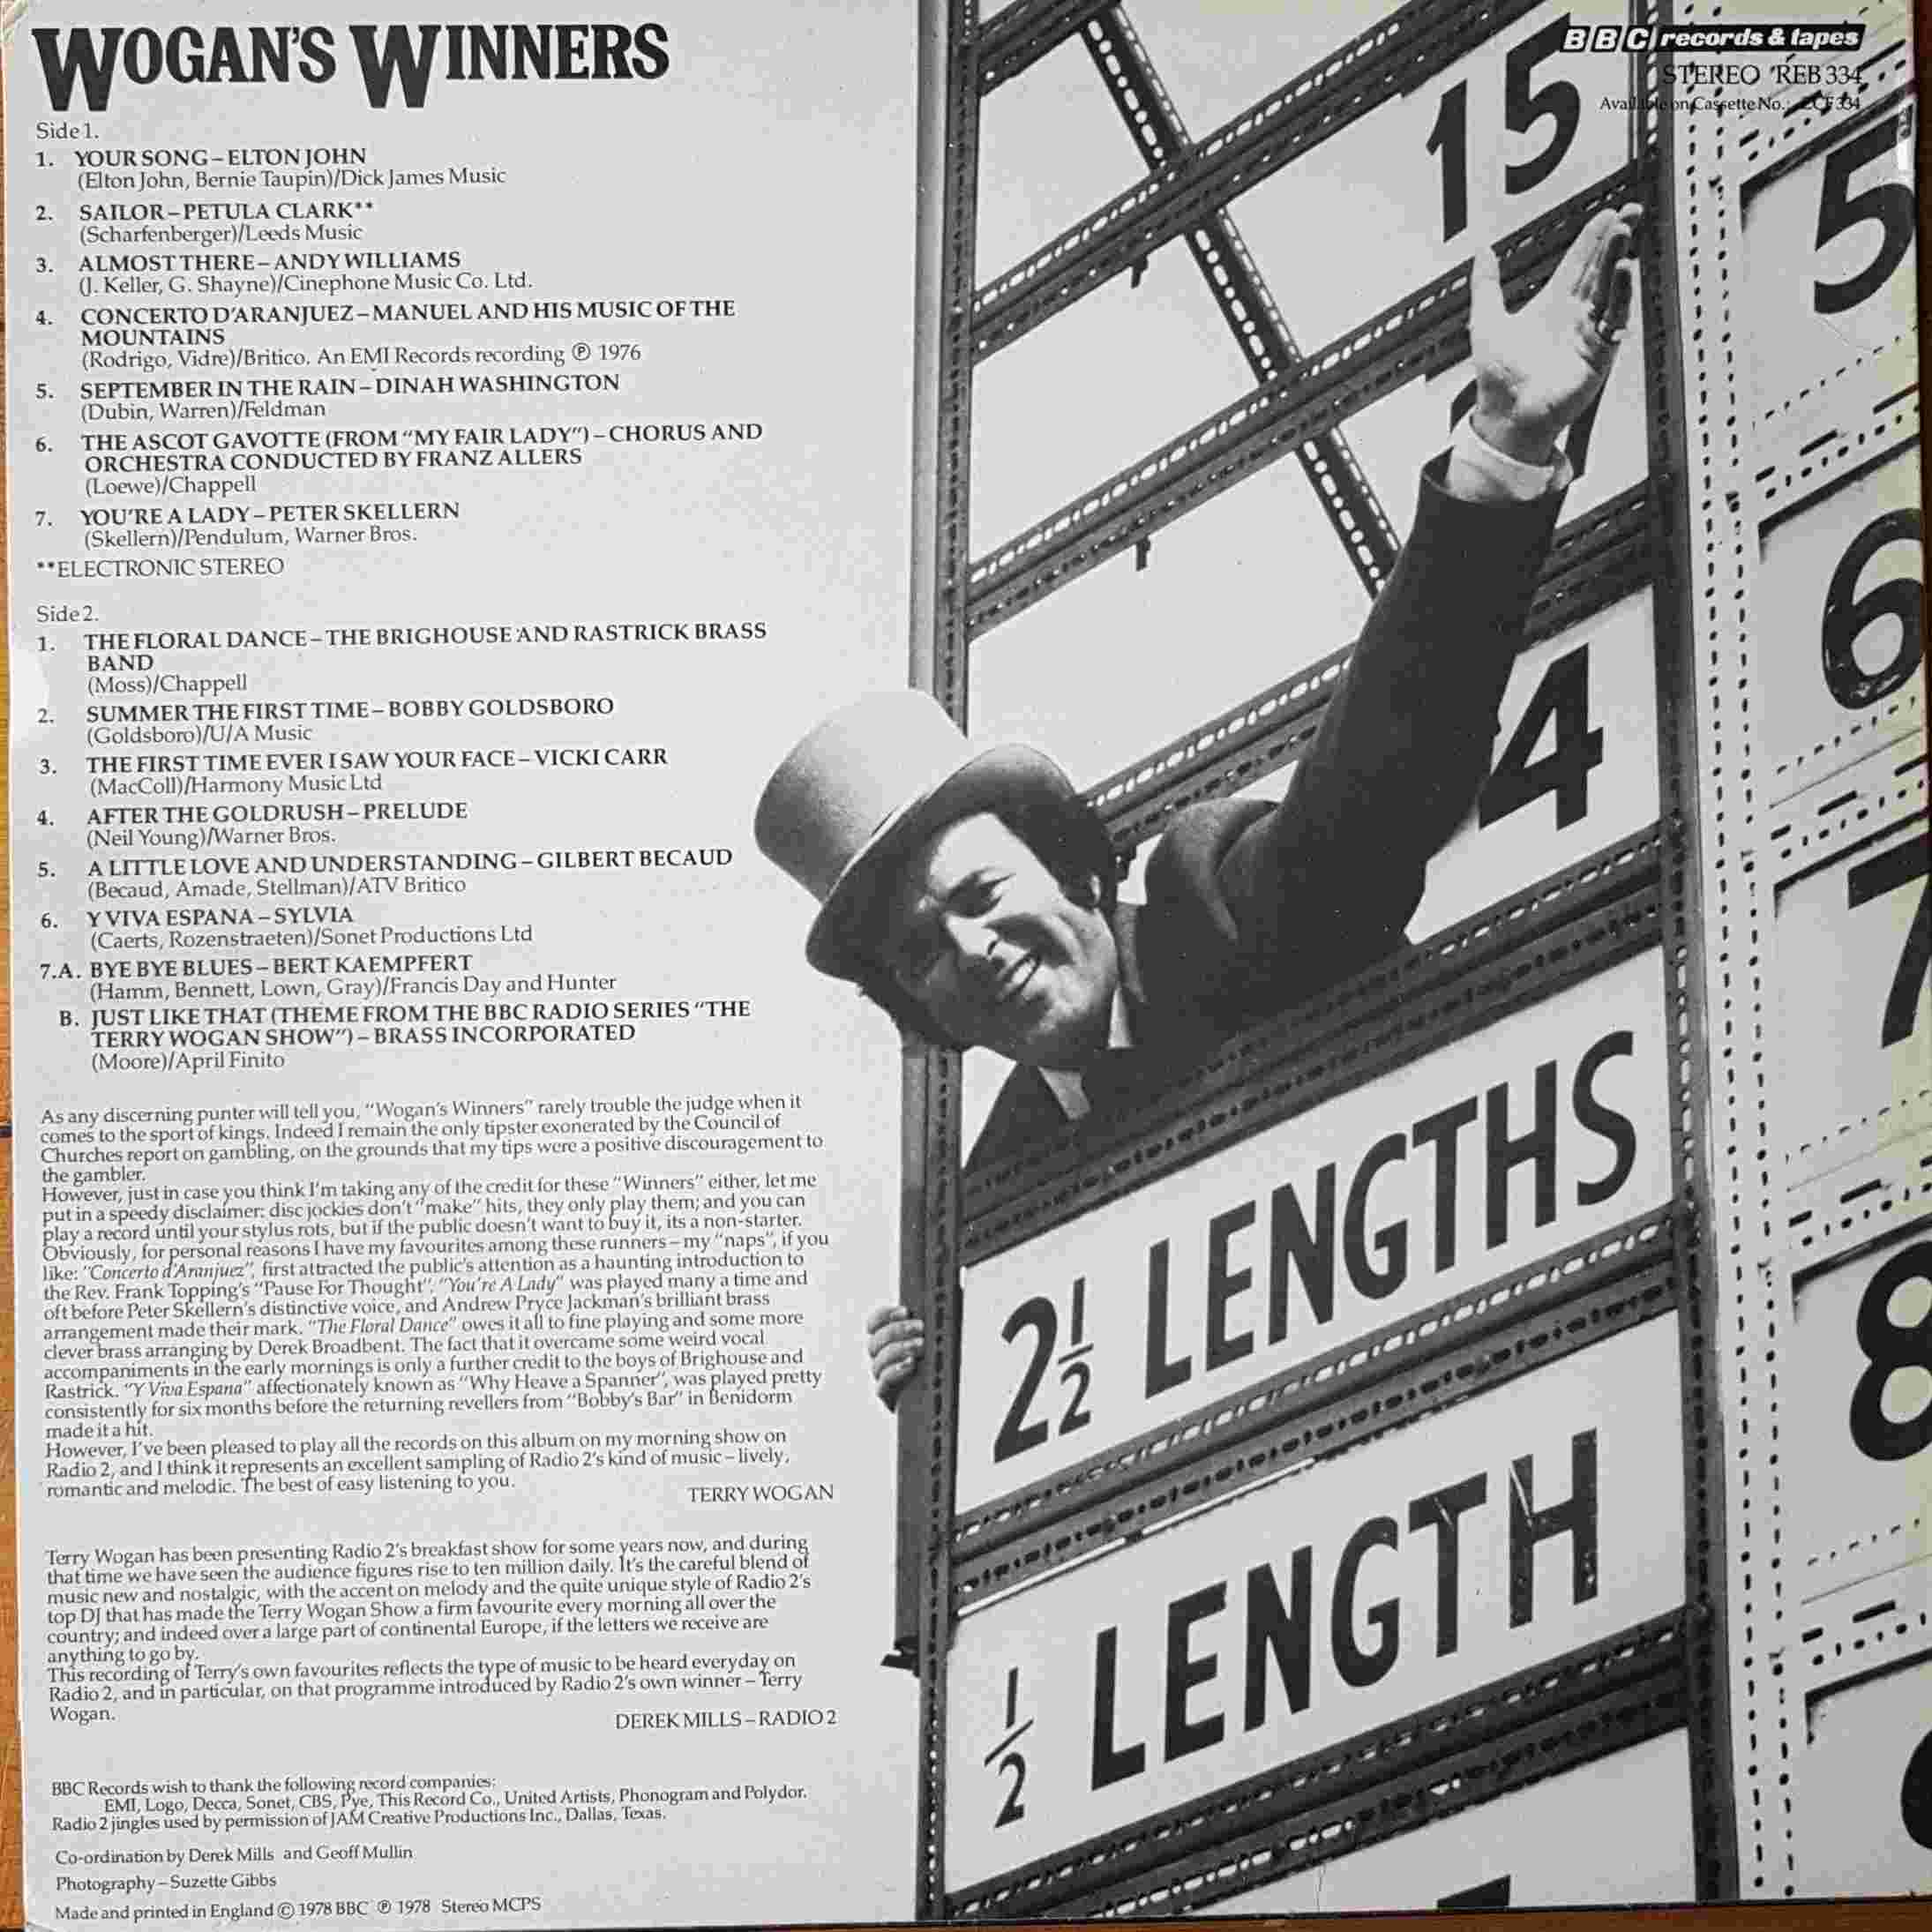 Picture of REB 334 Wogan's winners by artist Various from the BBC records and Tapes library